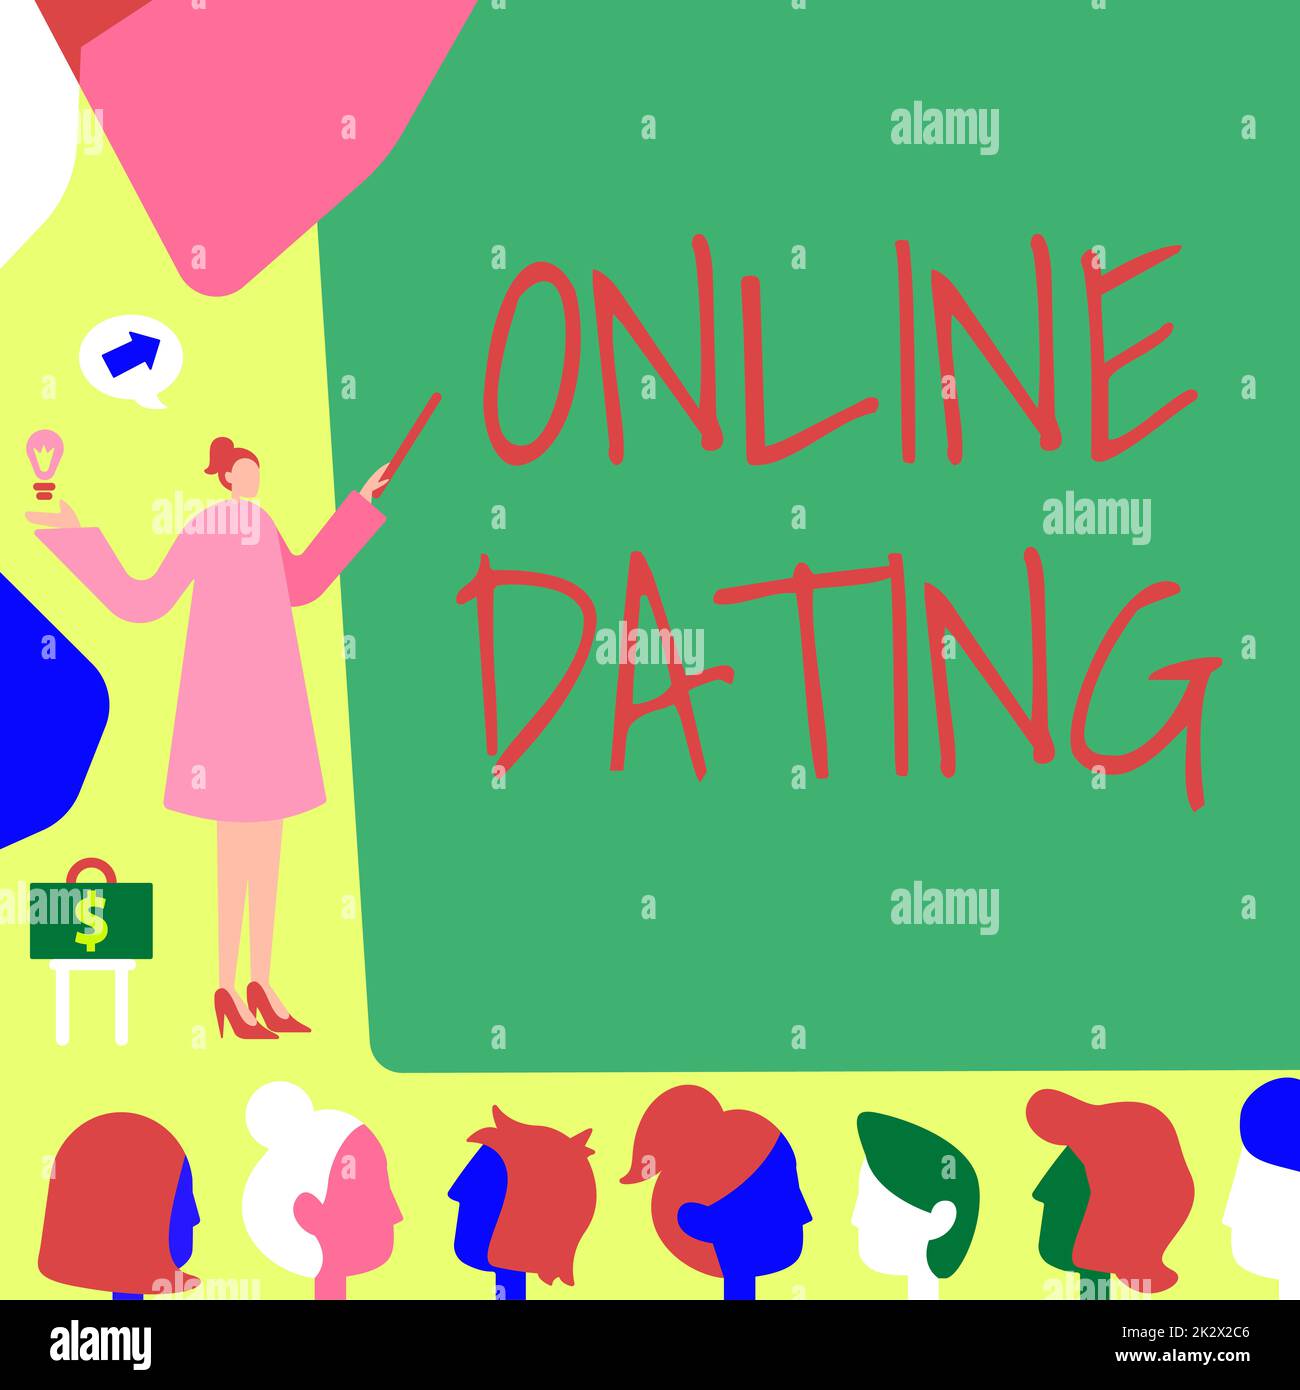 Writing displaying text Online Dating. Internet Concept Searching Matching Relationships eDating Video Chatting Lady Pointing Backdrop Presenting Newest Successfull Financial Strategies. Stock Photo